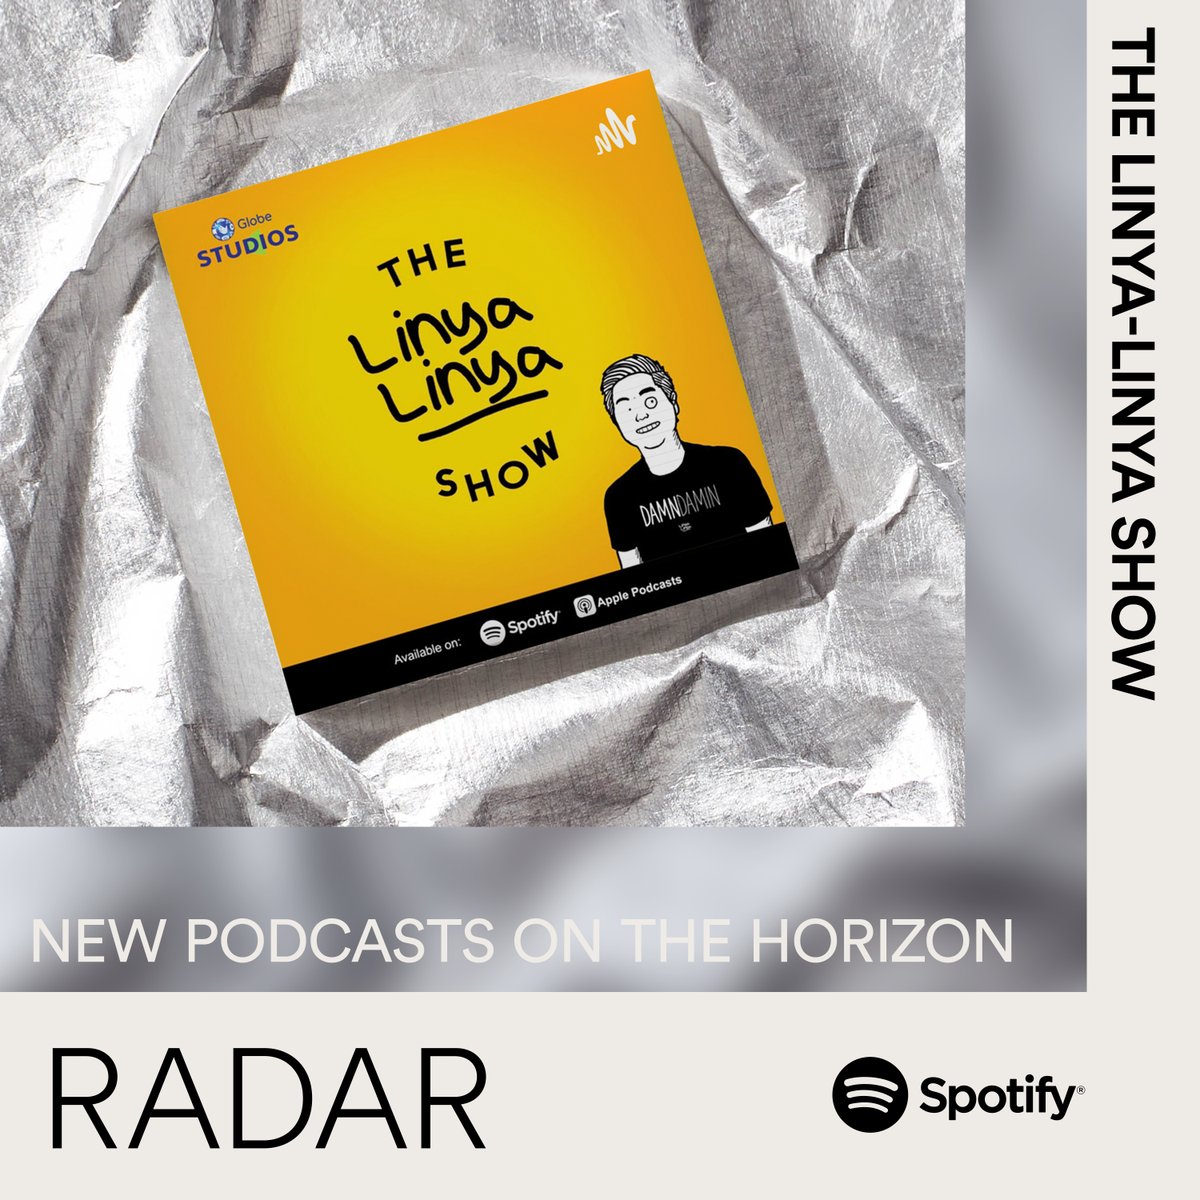 #TheLinyaLinyaShow is on everyone's RADAR!

There's more hugot, more learnings and more linyahans to come as @alisangalang and #TheLinyaLinyaShow join Spotify's all-new RADAR for Podcasters Program, which aims to support creators on their way to podcast stardom.